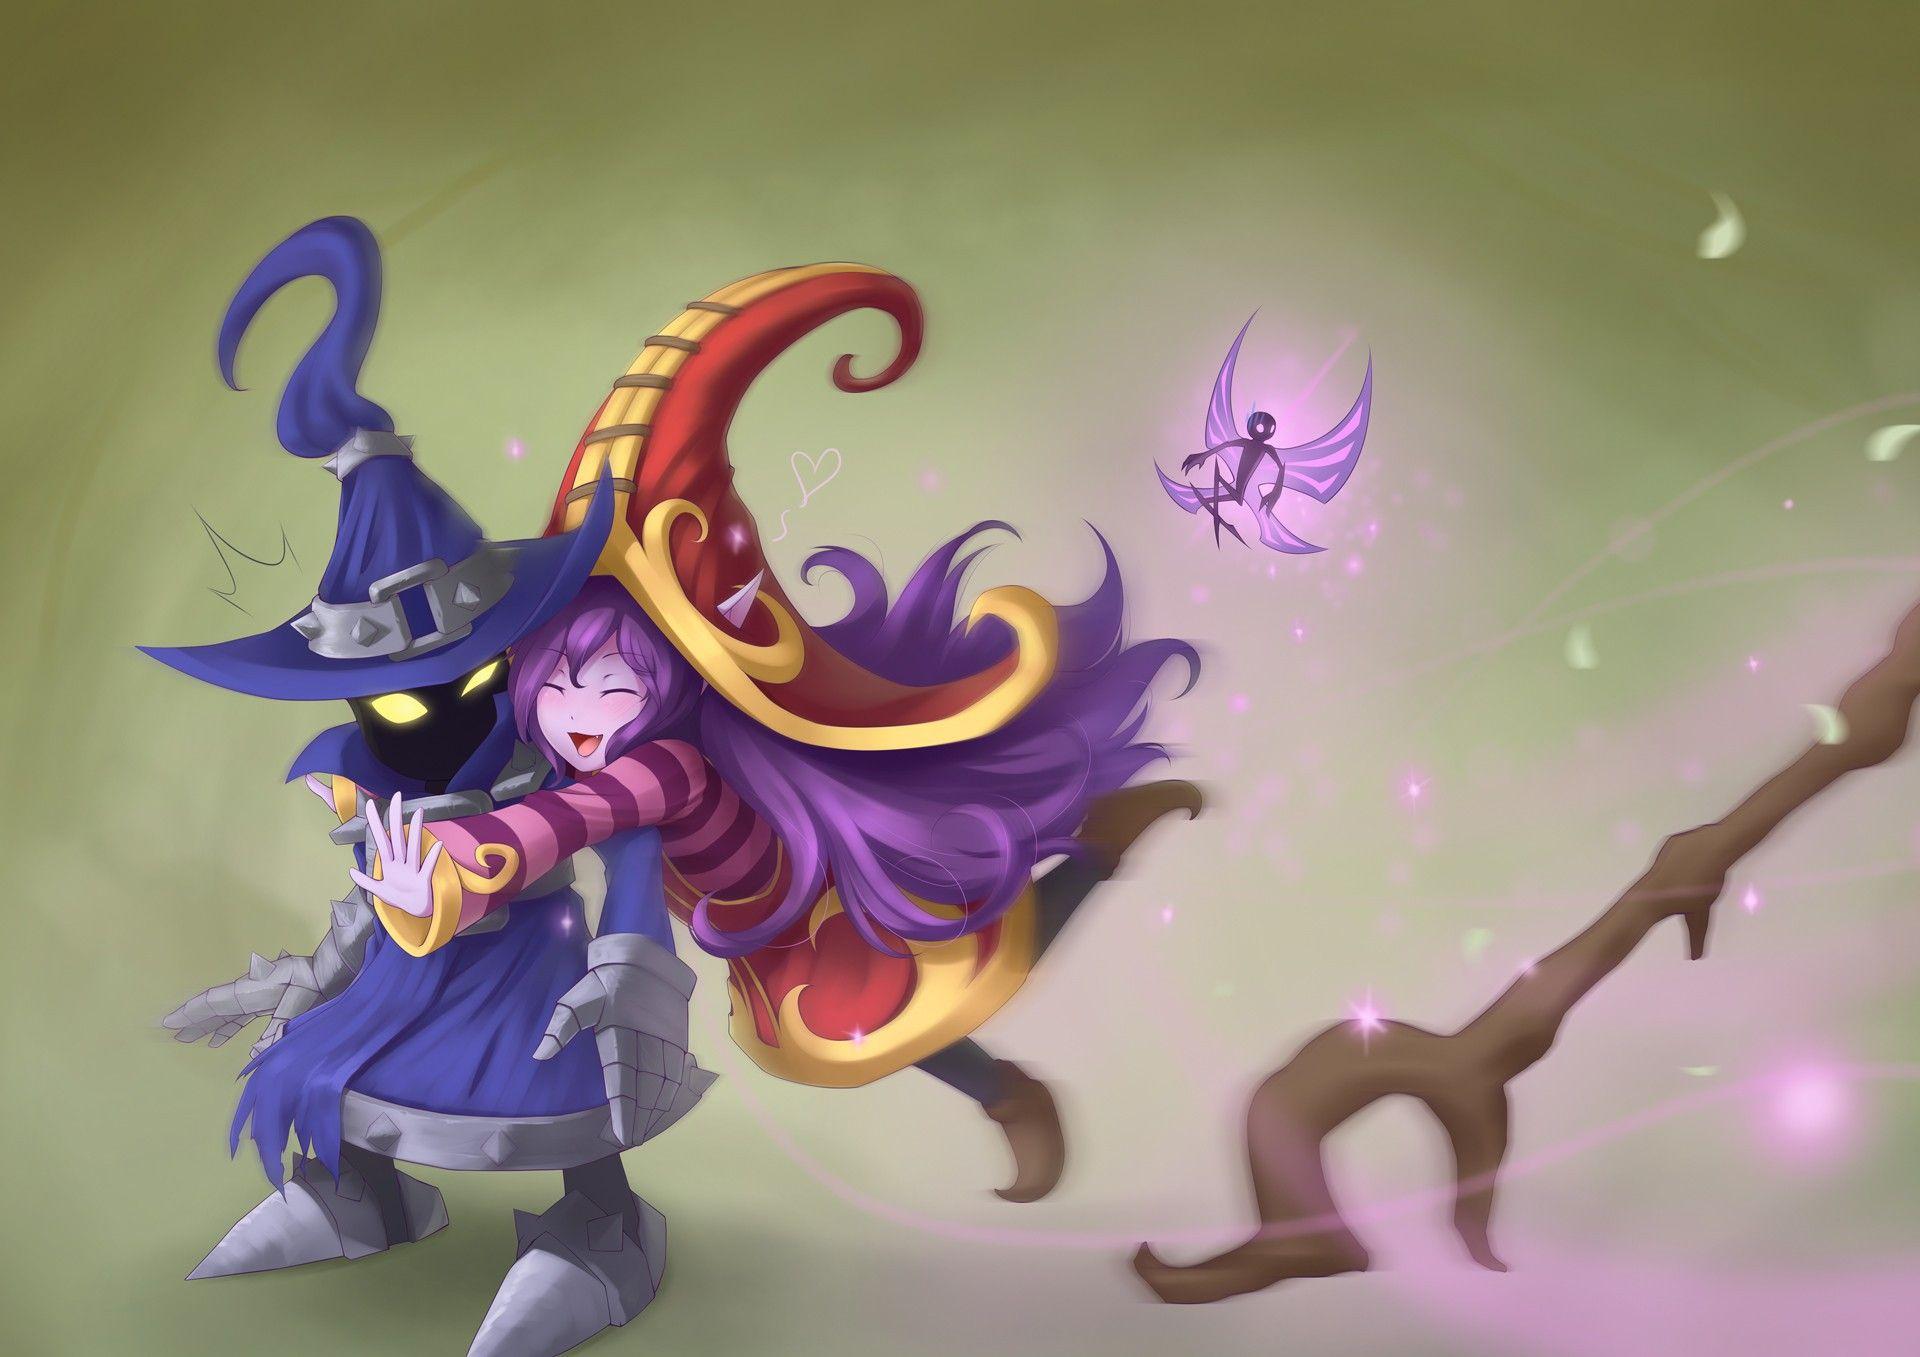 Veygar and Lulu anime League of Legends wallpaper and image